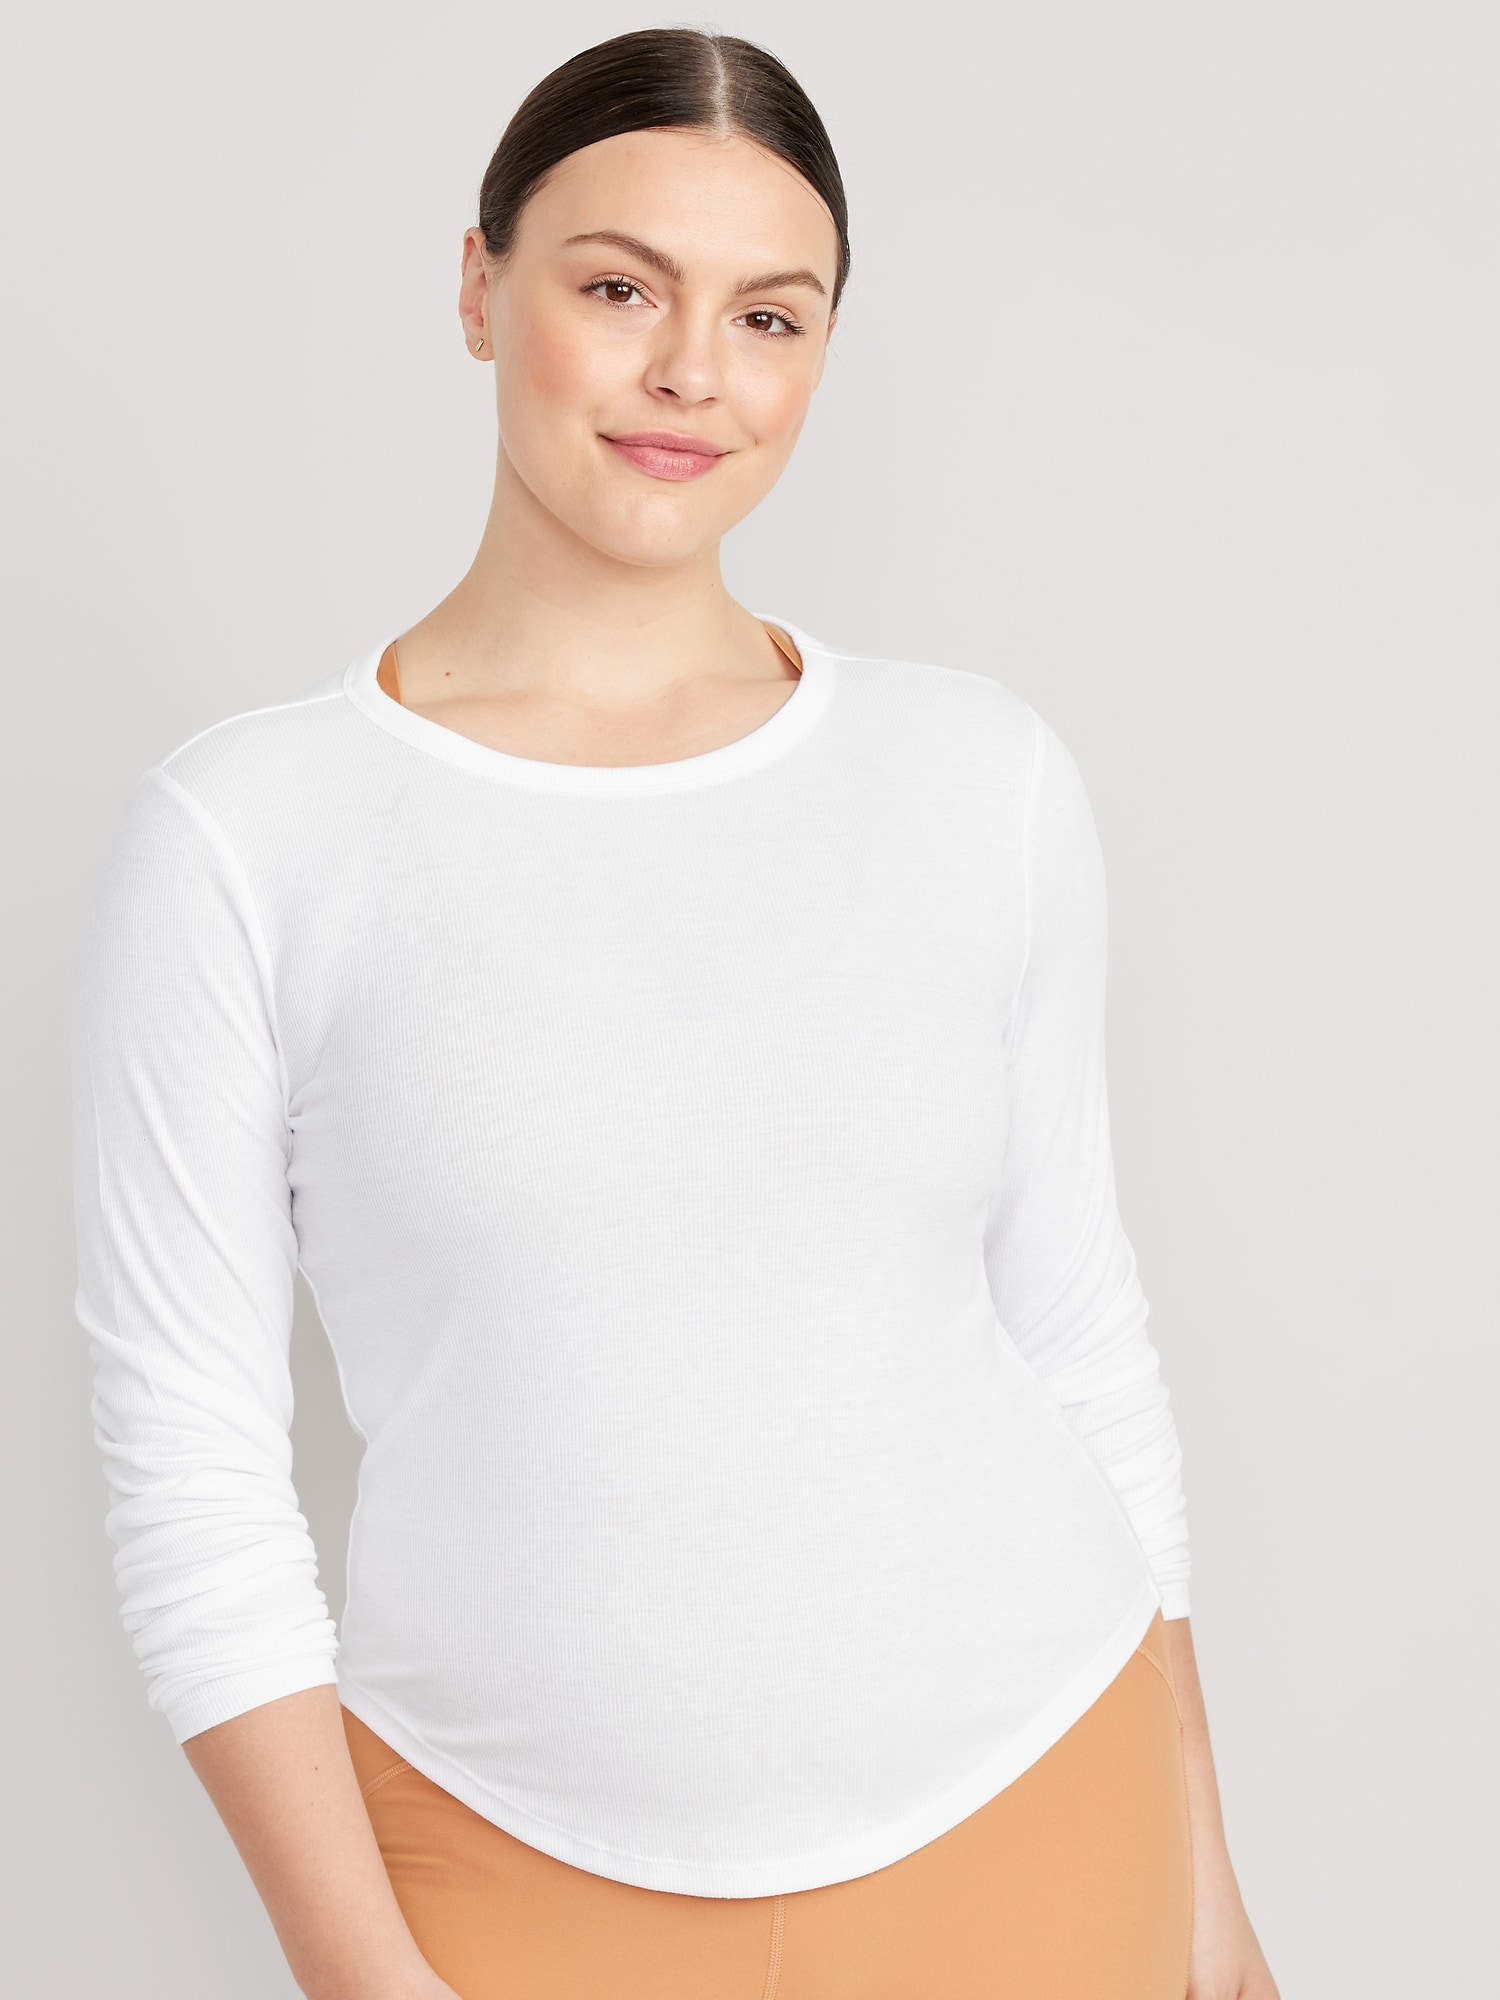 UltraLite Fitted Rib-Knit Top for Women | Old Navy